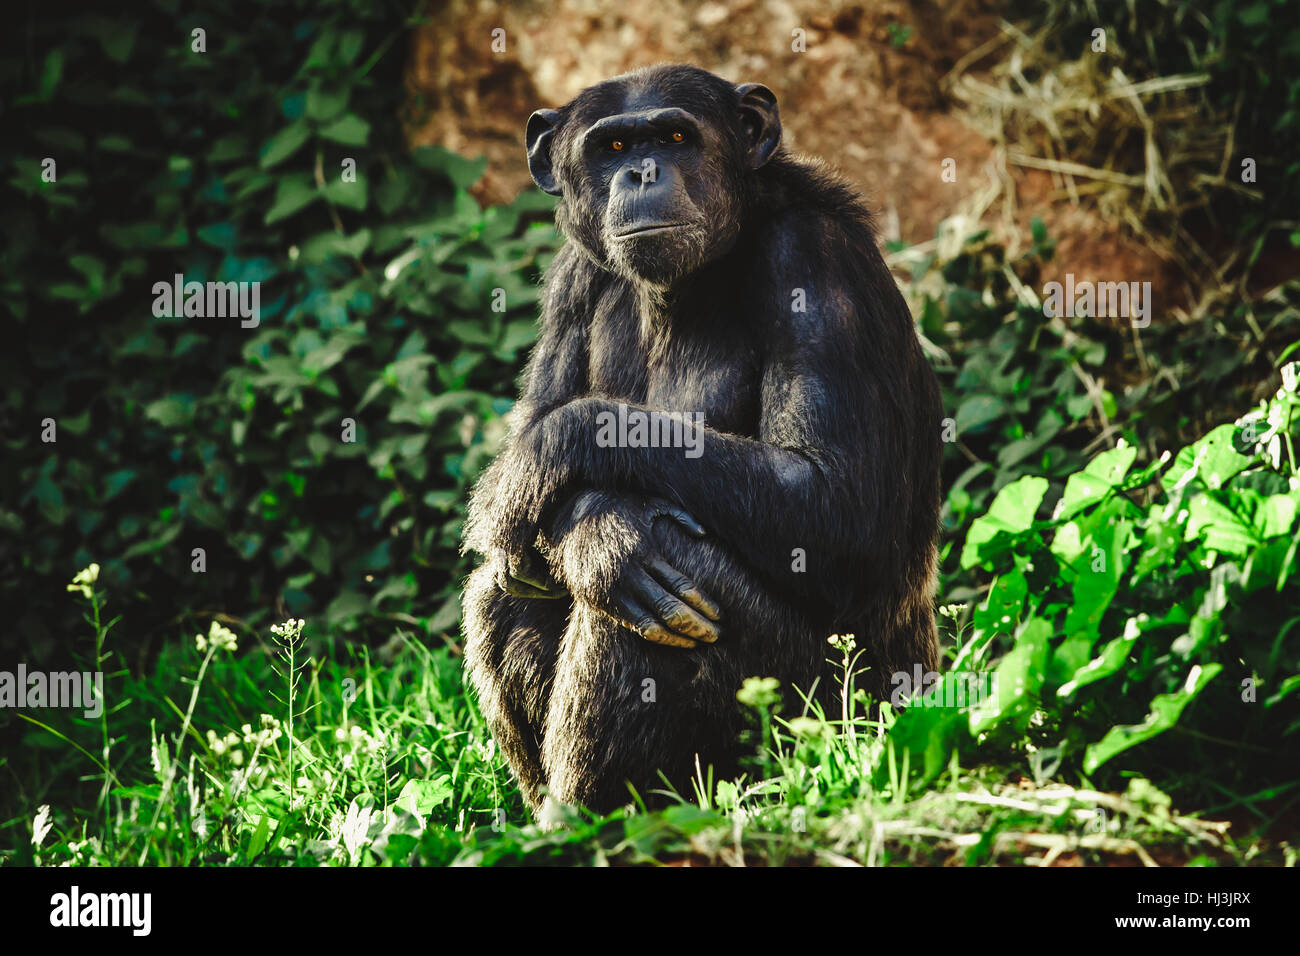 Chimpanzee sitting on grass between rocks looking into the camera lens with a deep look, in Rabat Zoo Stock Photo